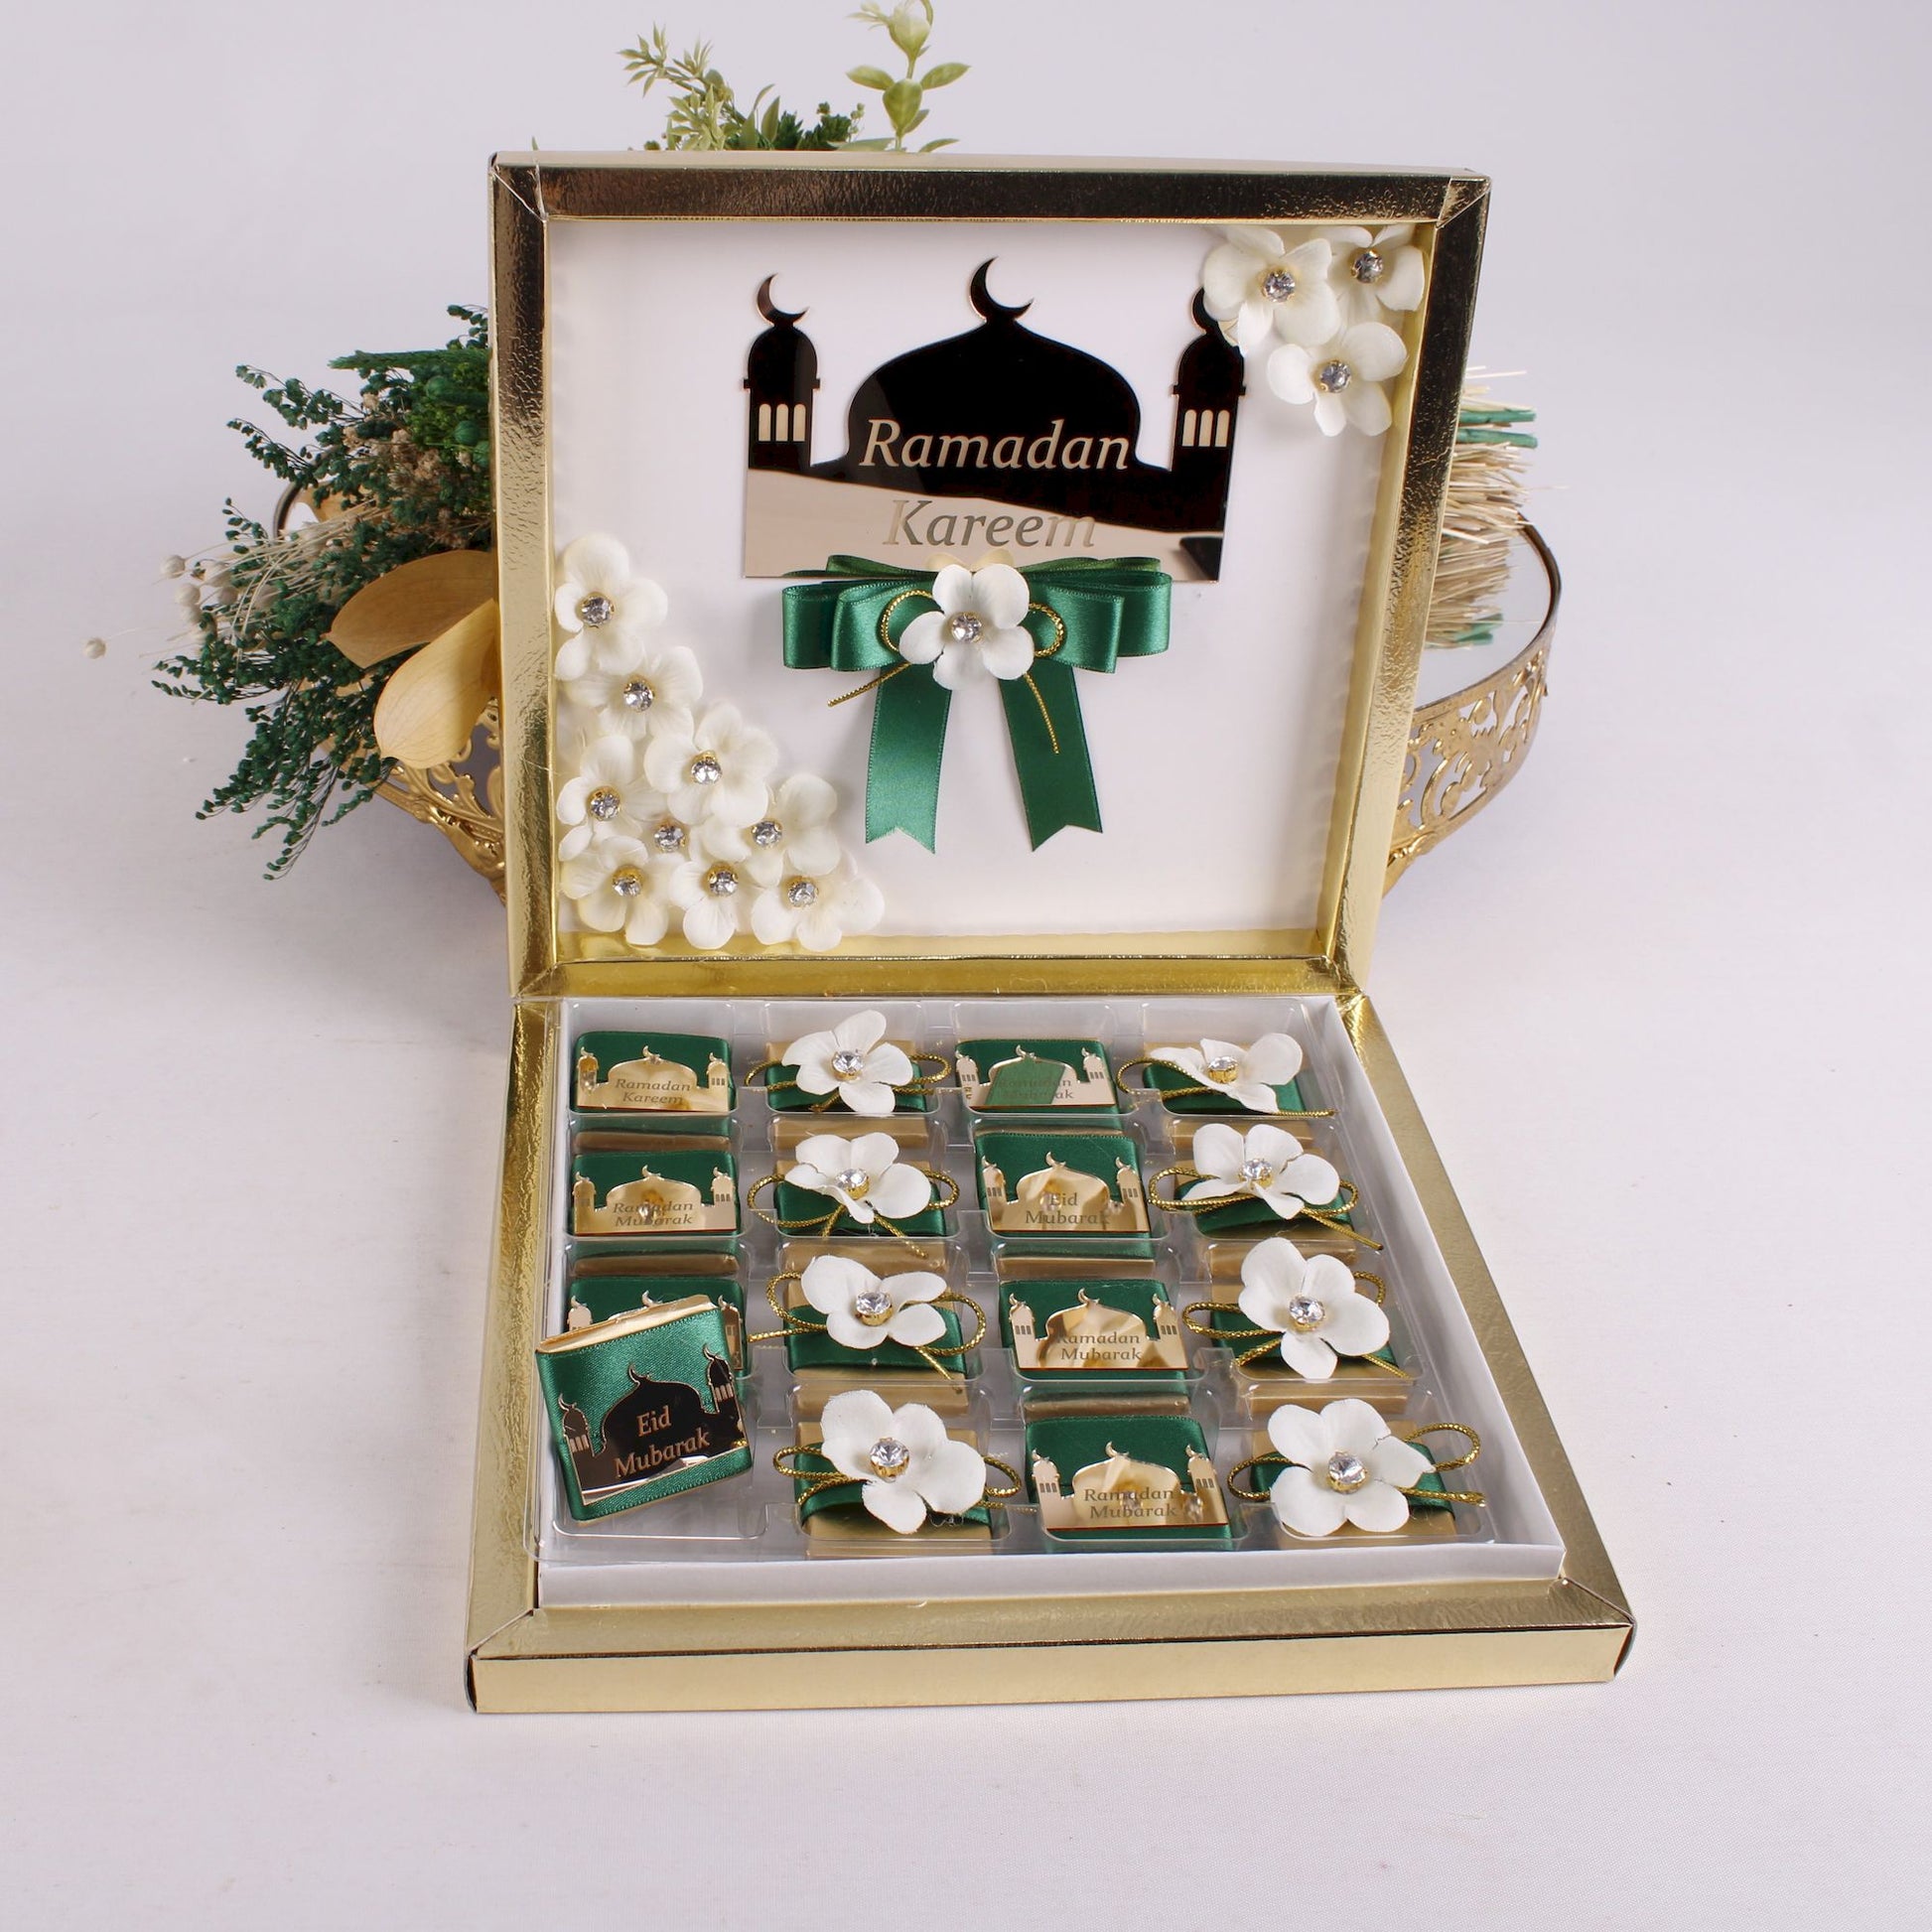 Chocolate Favors for Ramadan Eid, Happy Birthday, Baby Shower, Wedding - Islamic Elite Favors is a handmade gift shop offering a wide variety of unique and personalized gifts for all occasions. Whether you're looking for the perfect Ramadan, Eid, Hajj, wedding gift or something special for a birthday, baby shower or anniversary, we have something for everyone. High quality, made with love.